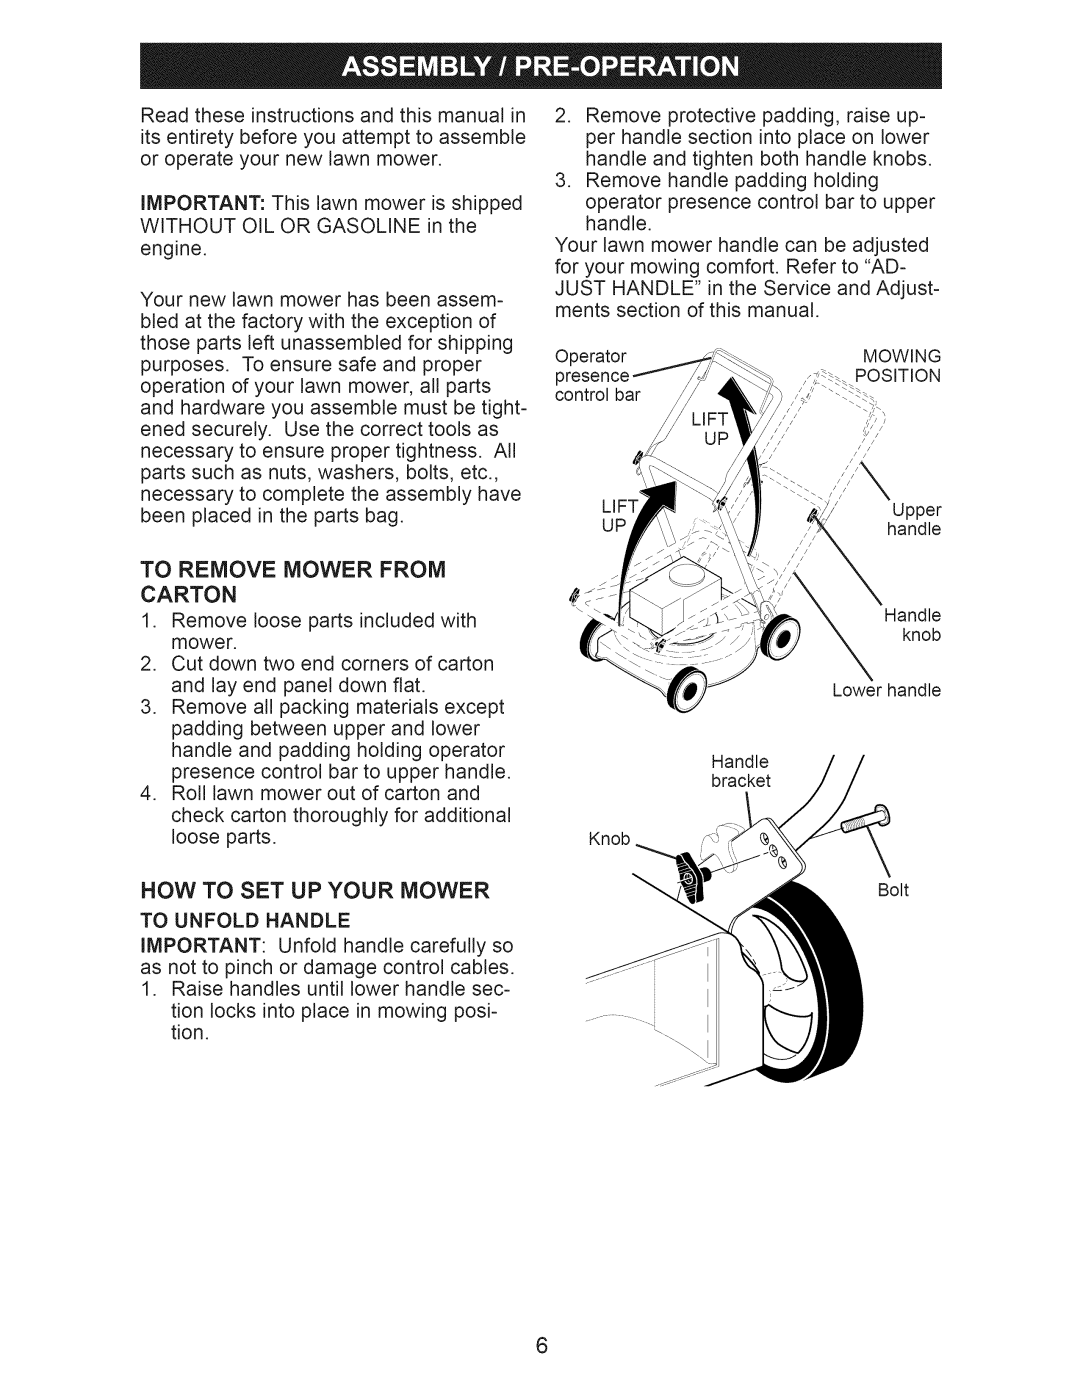 Craftsman 917.374360 owner manual Now To Set Up Your Mower, To Remove Mower From Carton 